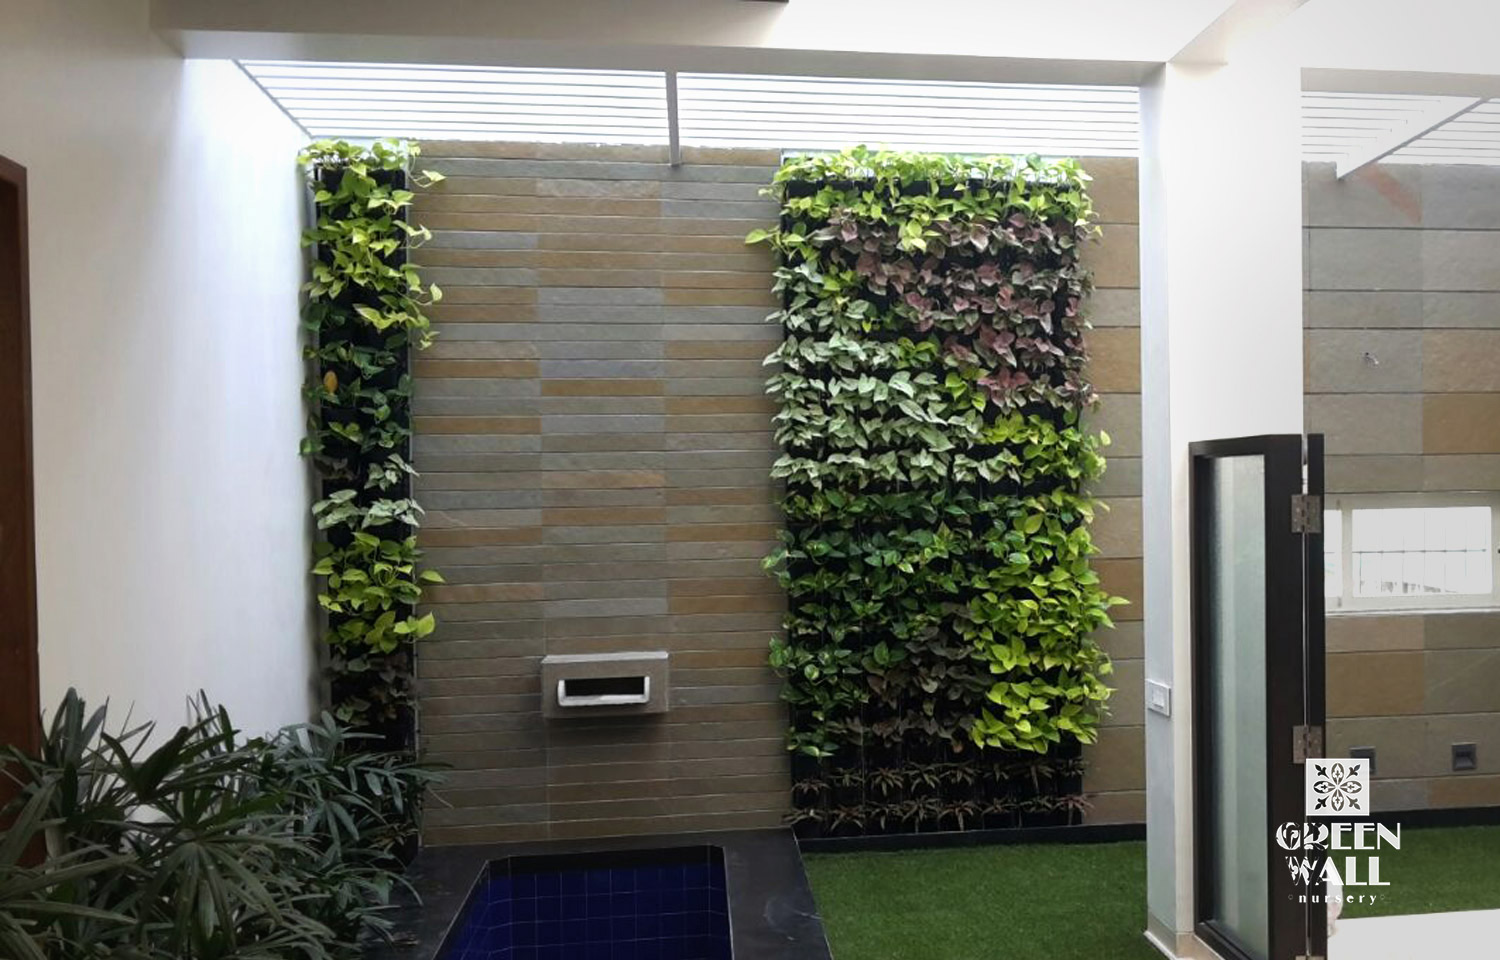 Green wall system